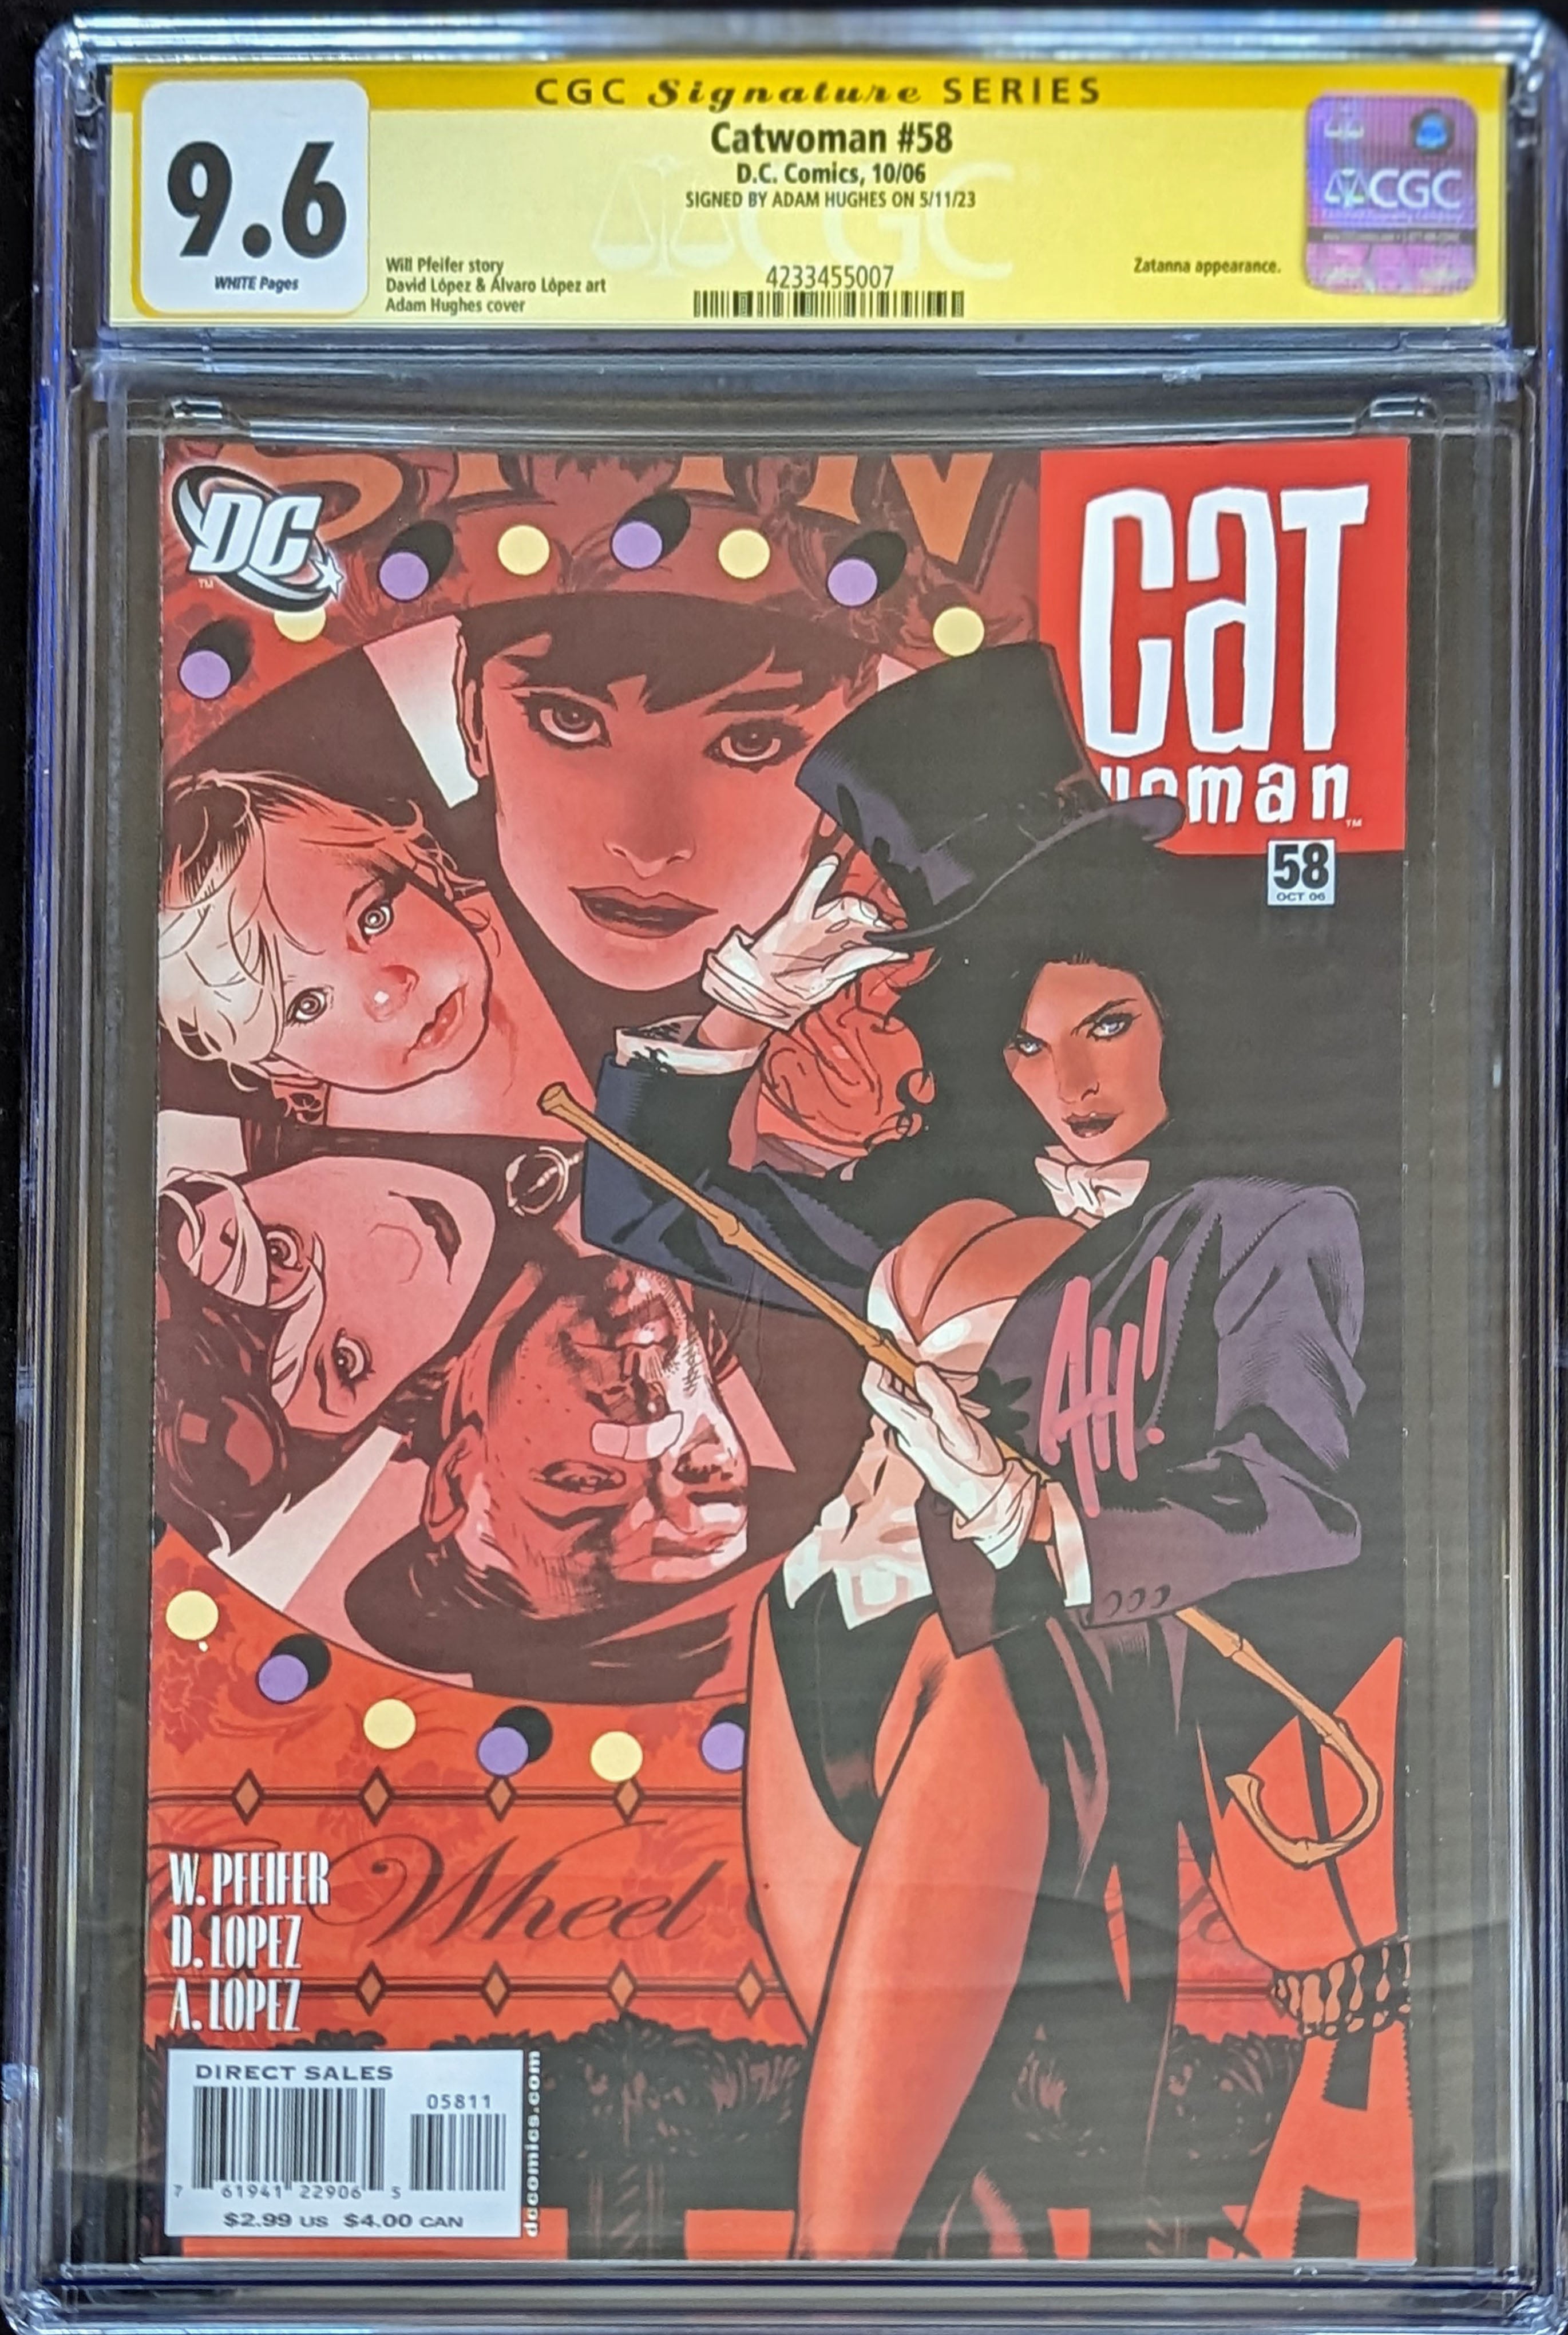 Catwoman #58 (2006) Graded CGC 9.6 Signed by Adam Hughes